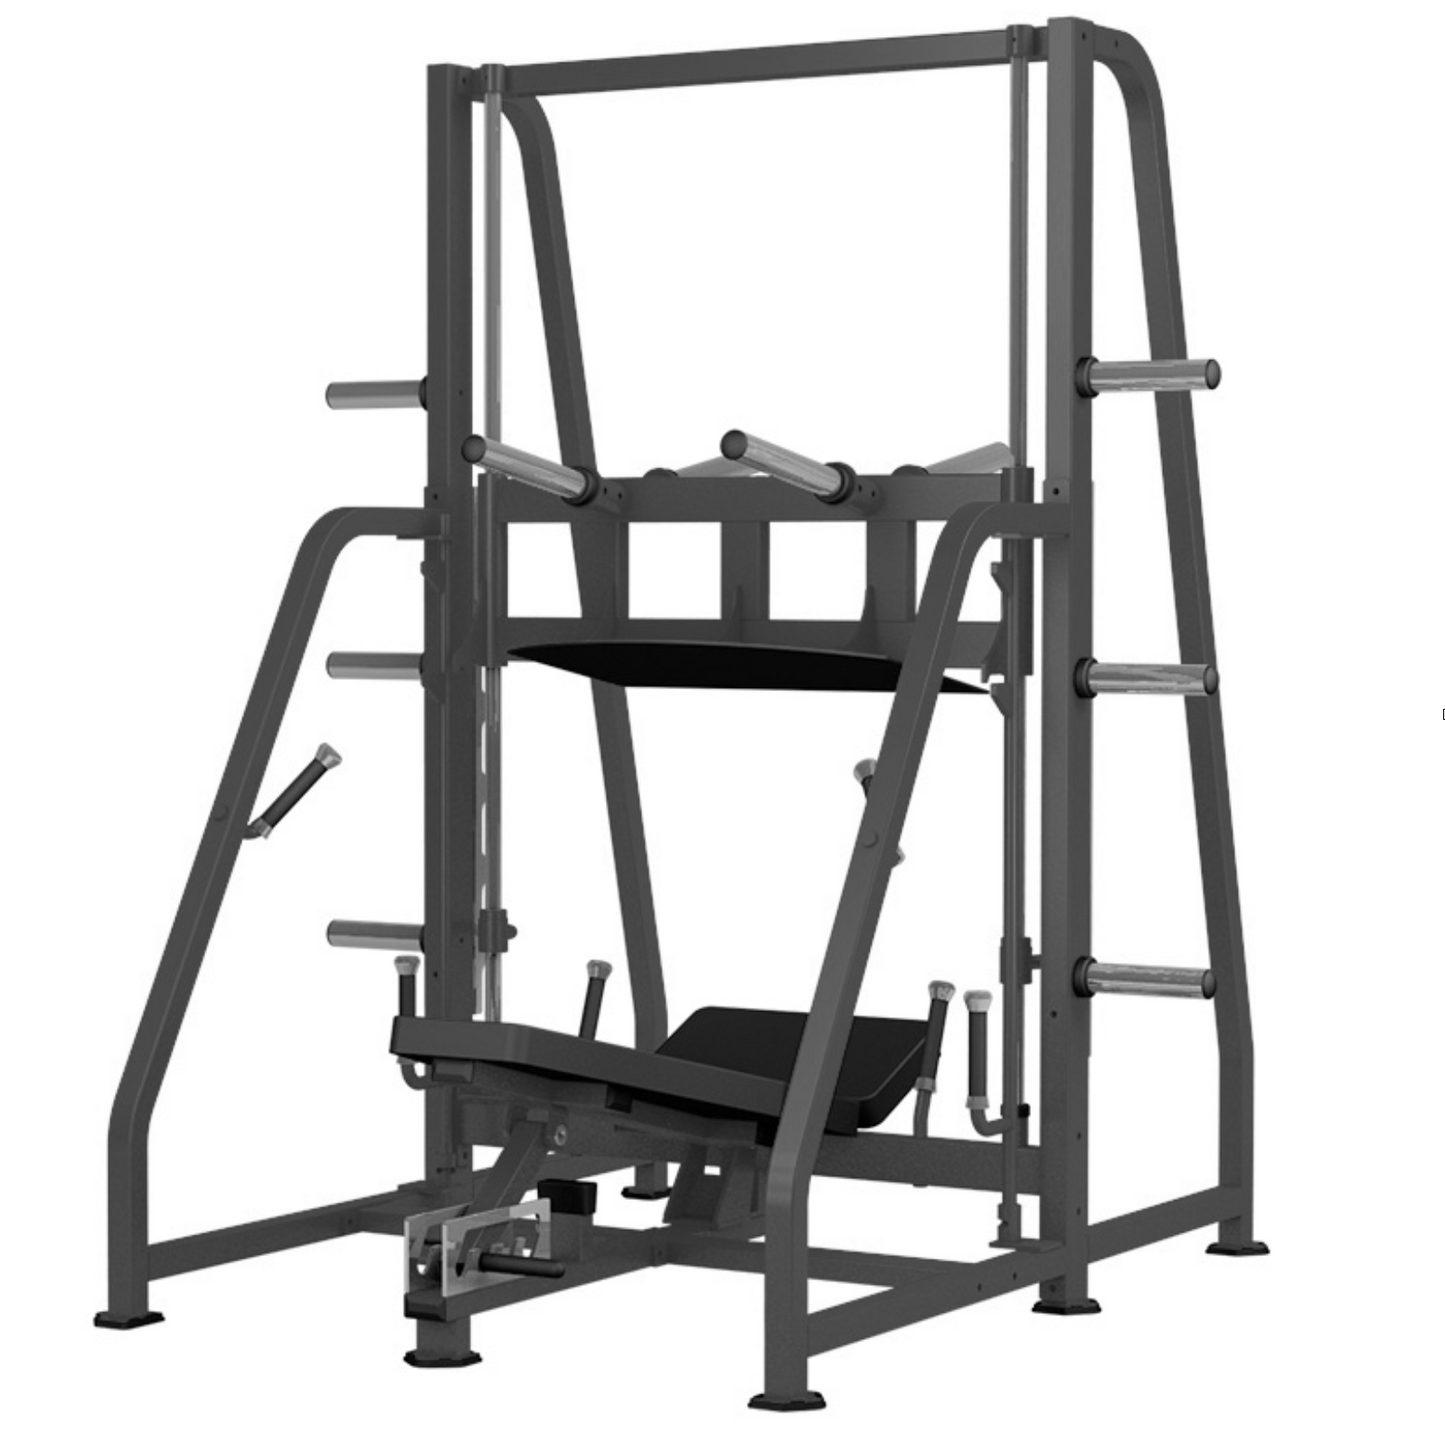 Muscle D Excel Vertical Leg Press (Plate Loaded)